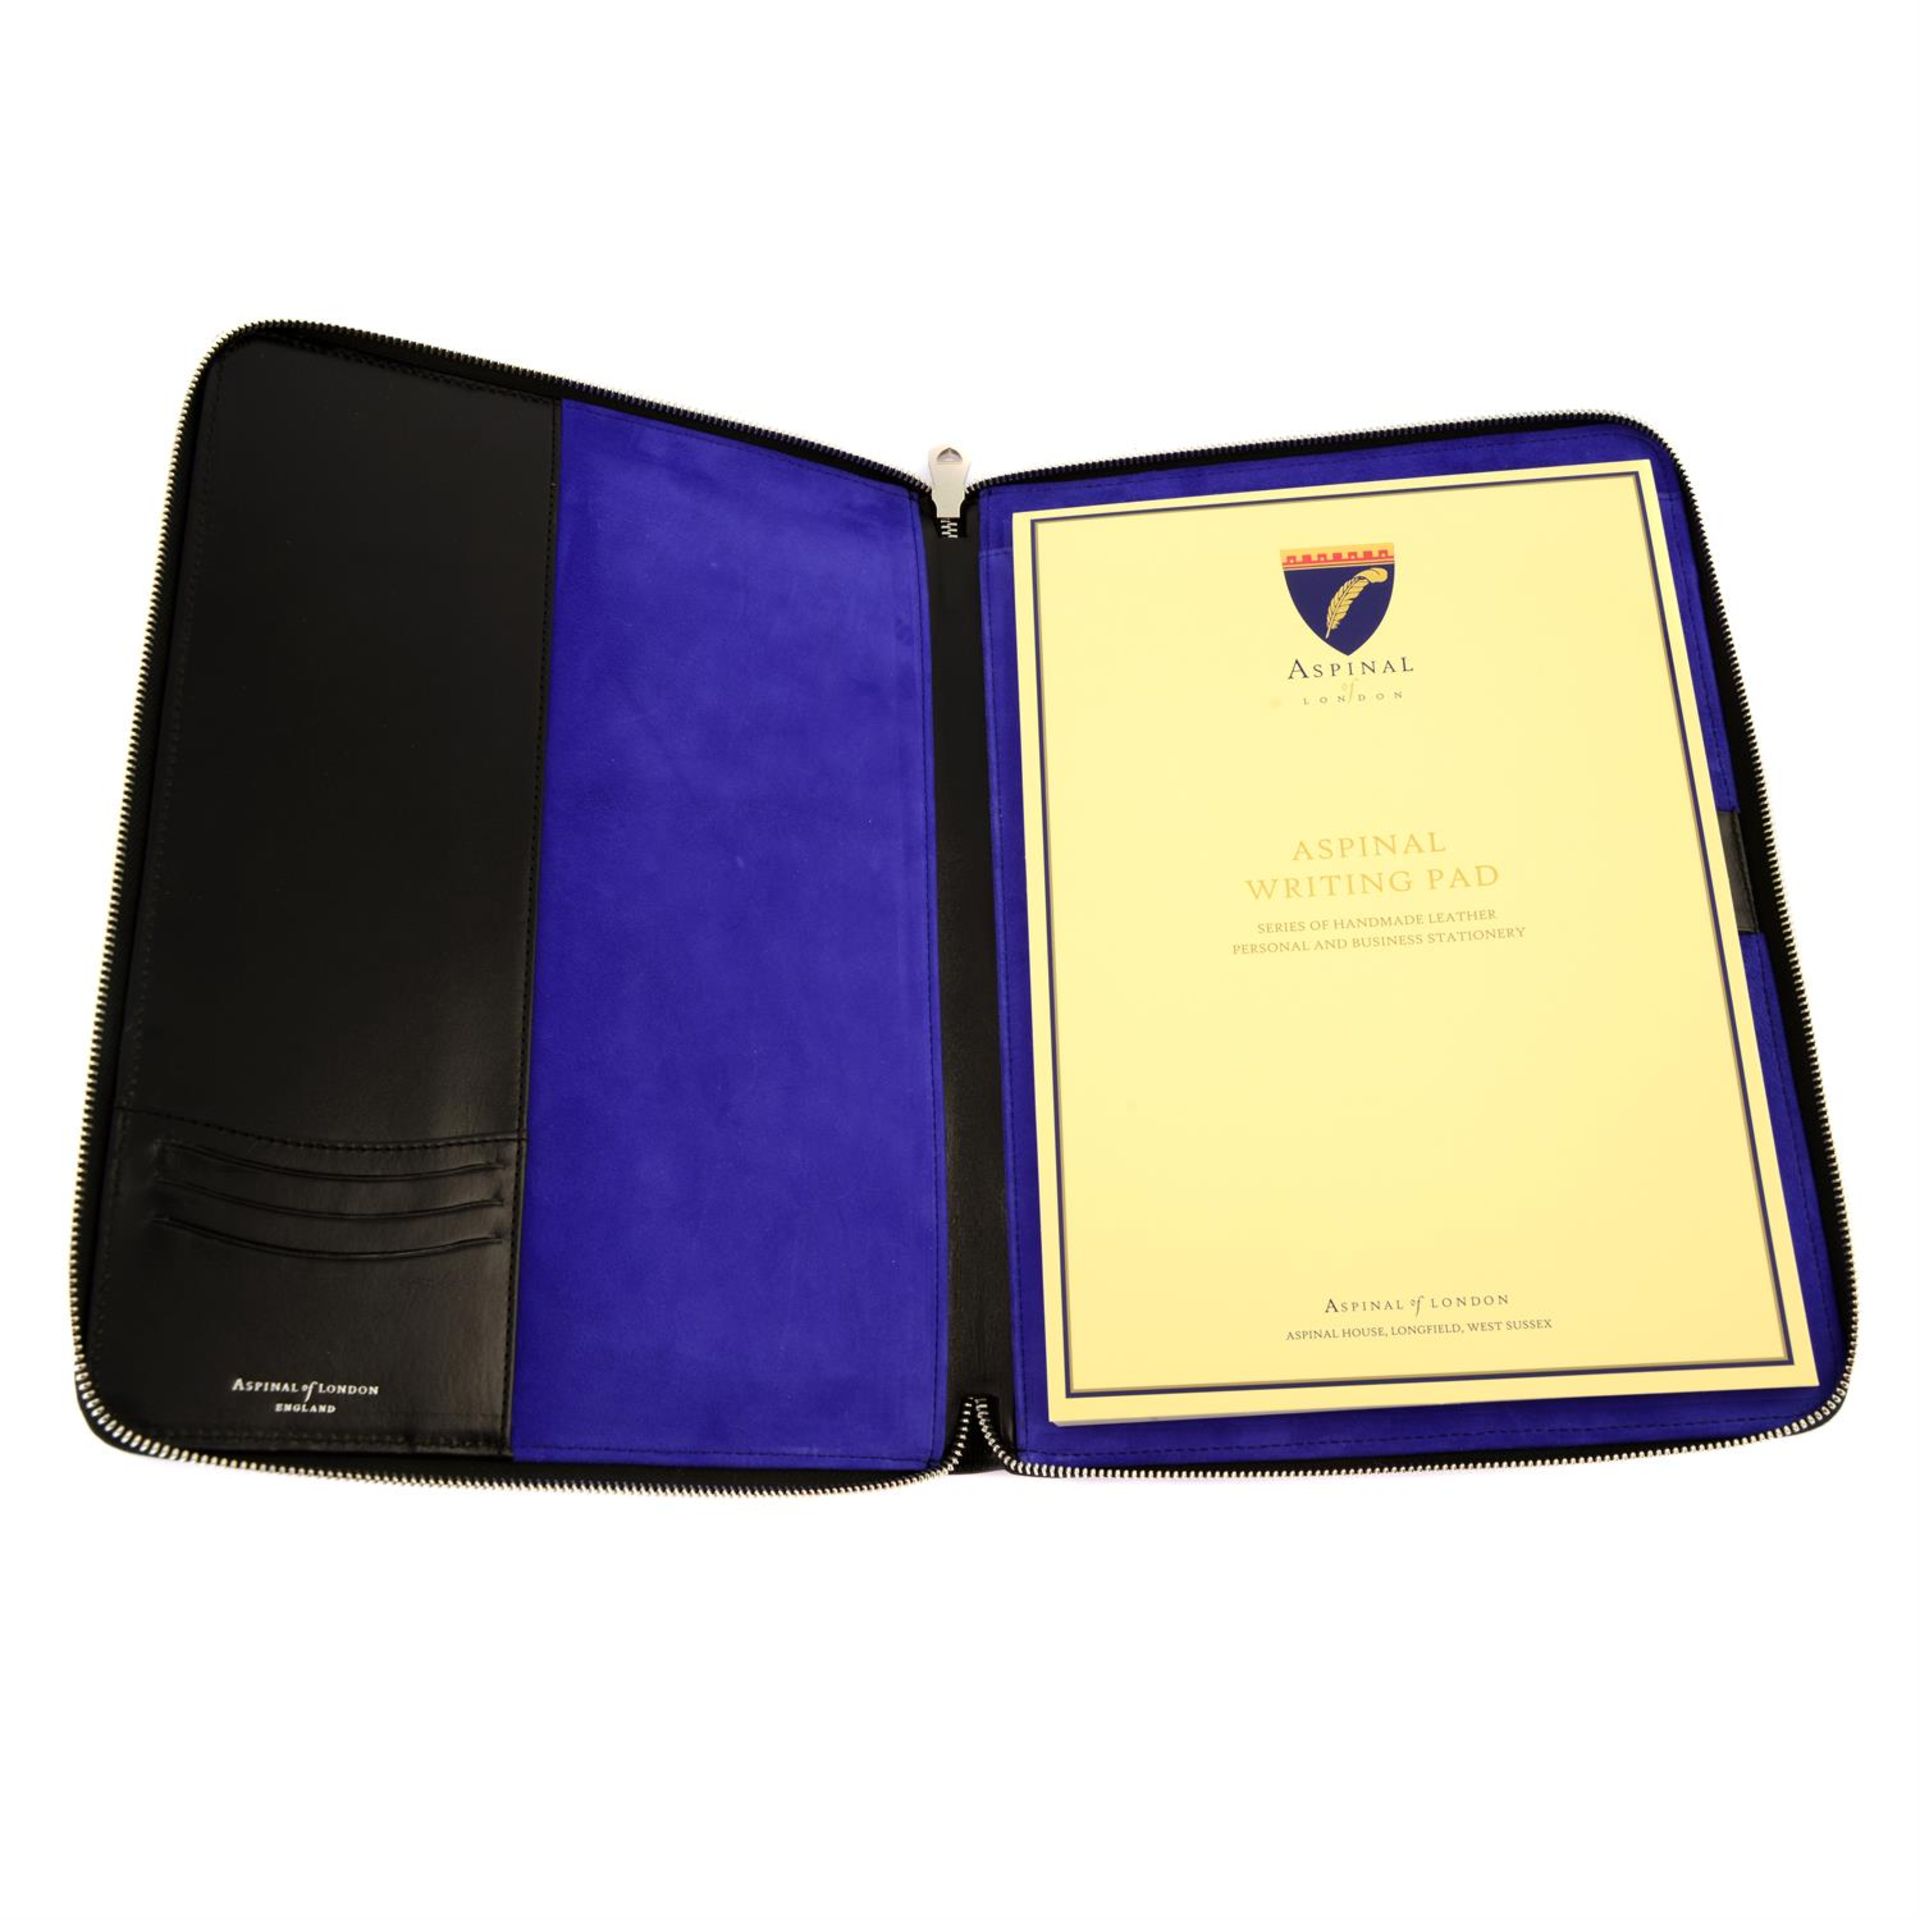 ASPINAL OF LONDON - an A4 black leather Padfolio. - Image 3 of 3